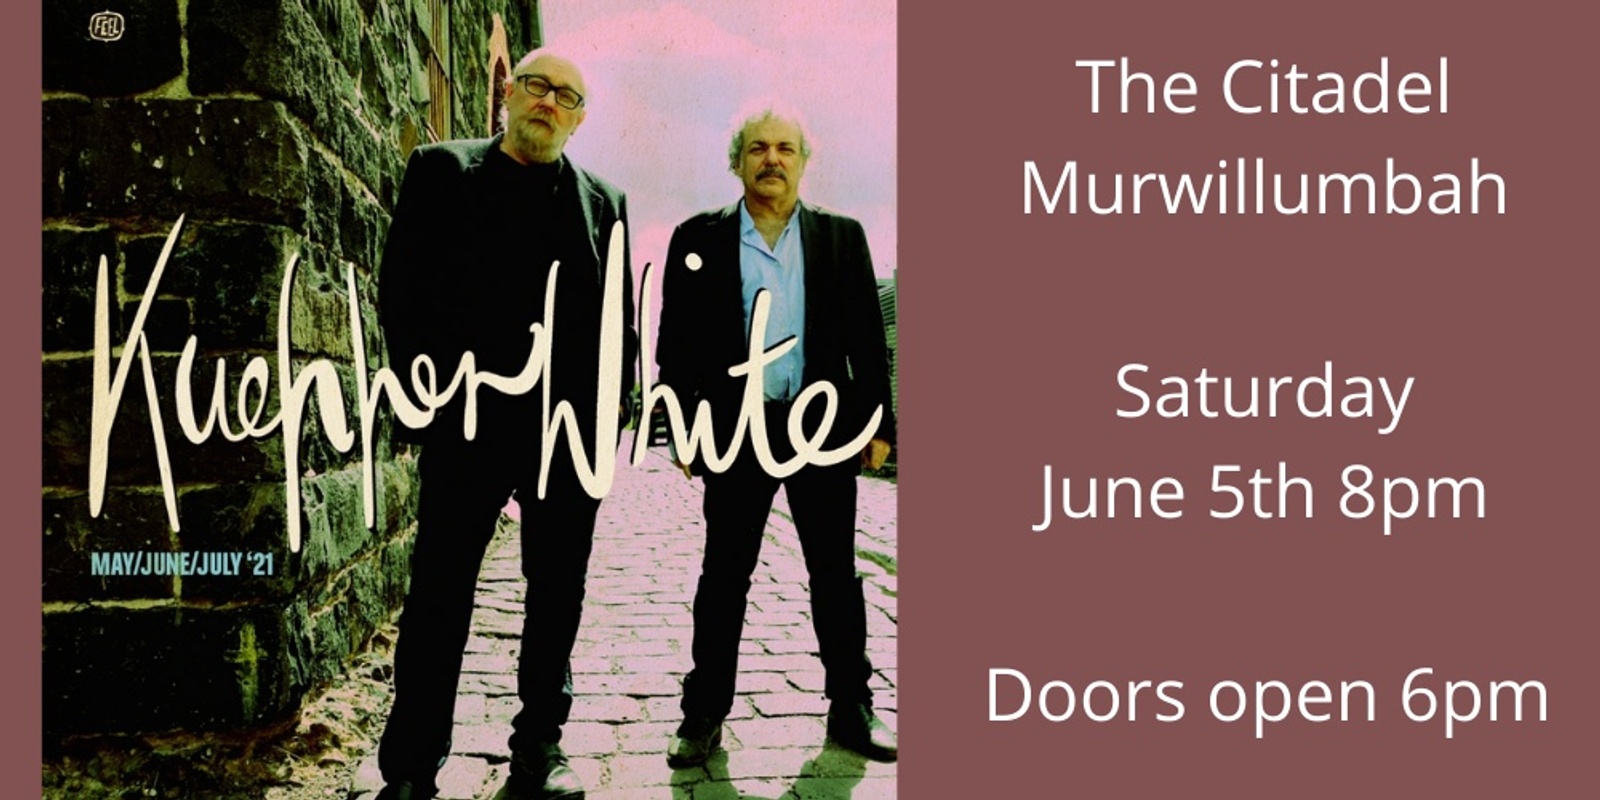 Ed Kuepper with Jim White-Sat 5th June